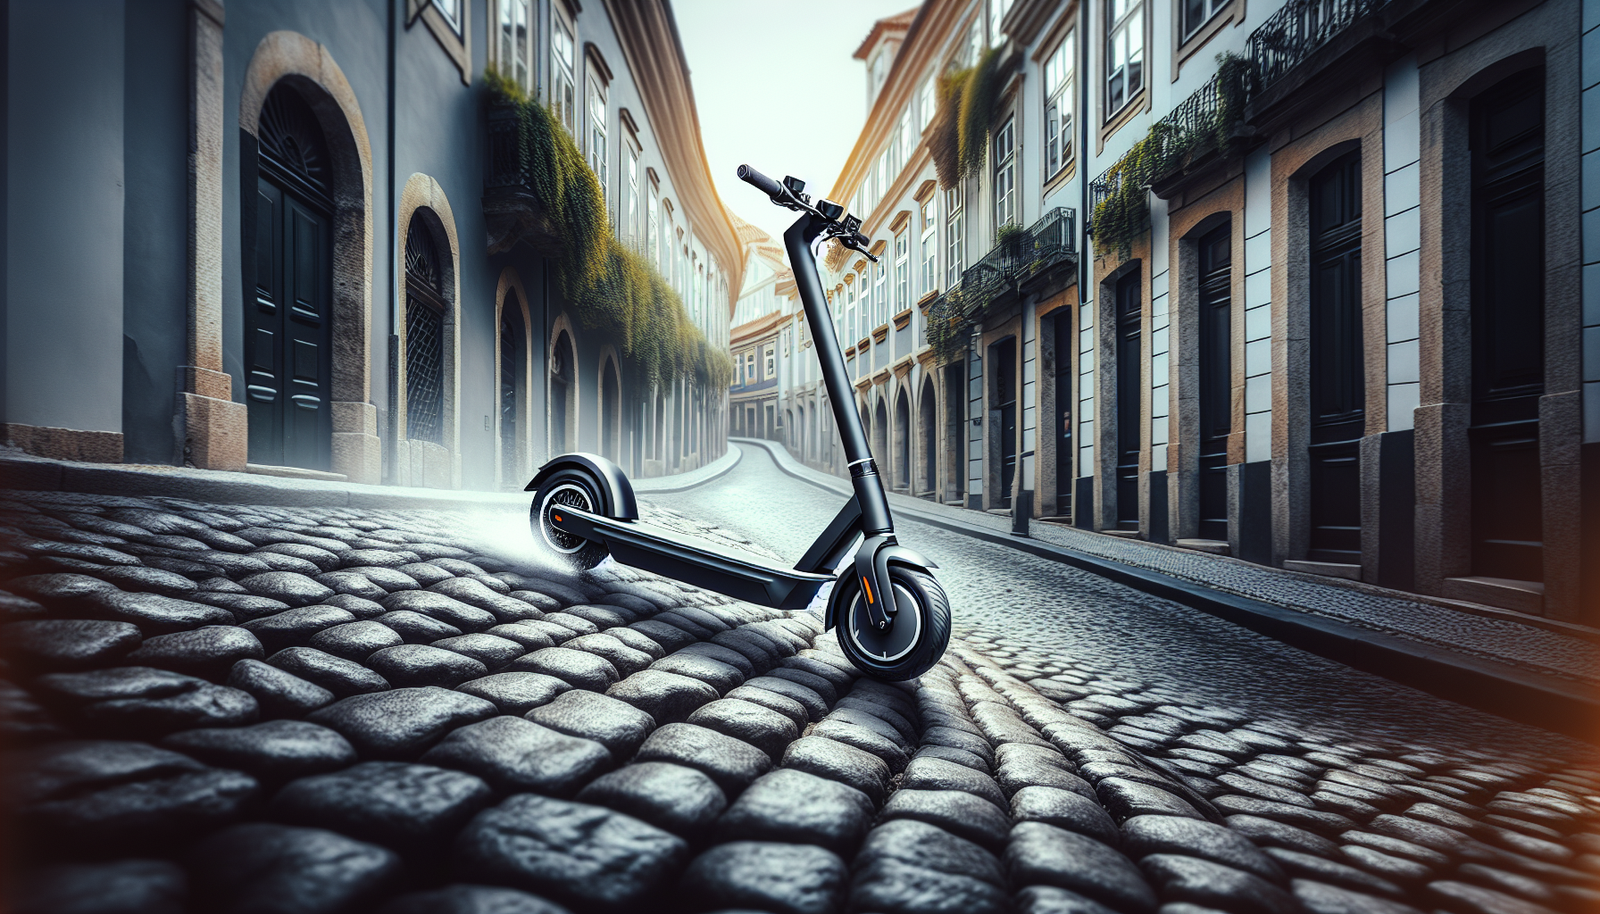 Can I Ride My Electric Scooter On Uneven Surfaces, Like Cobblestone Or Gravel?